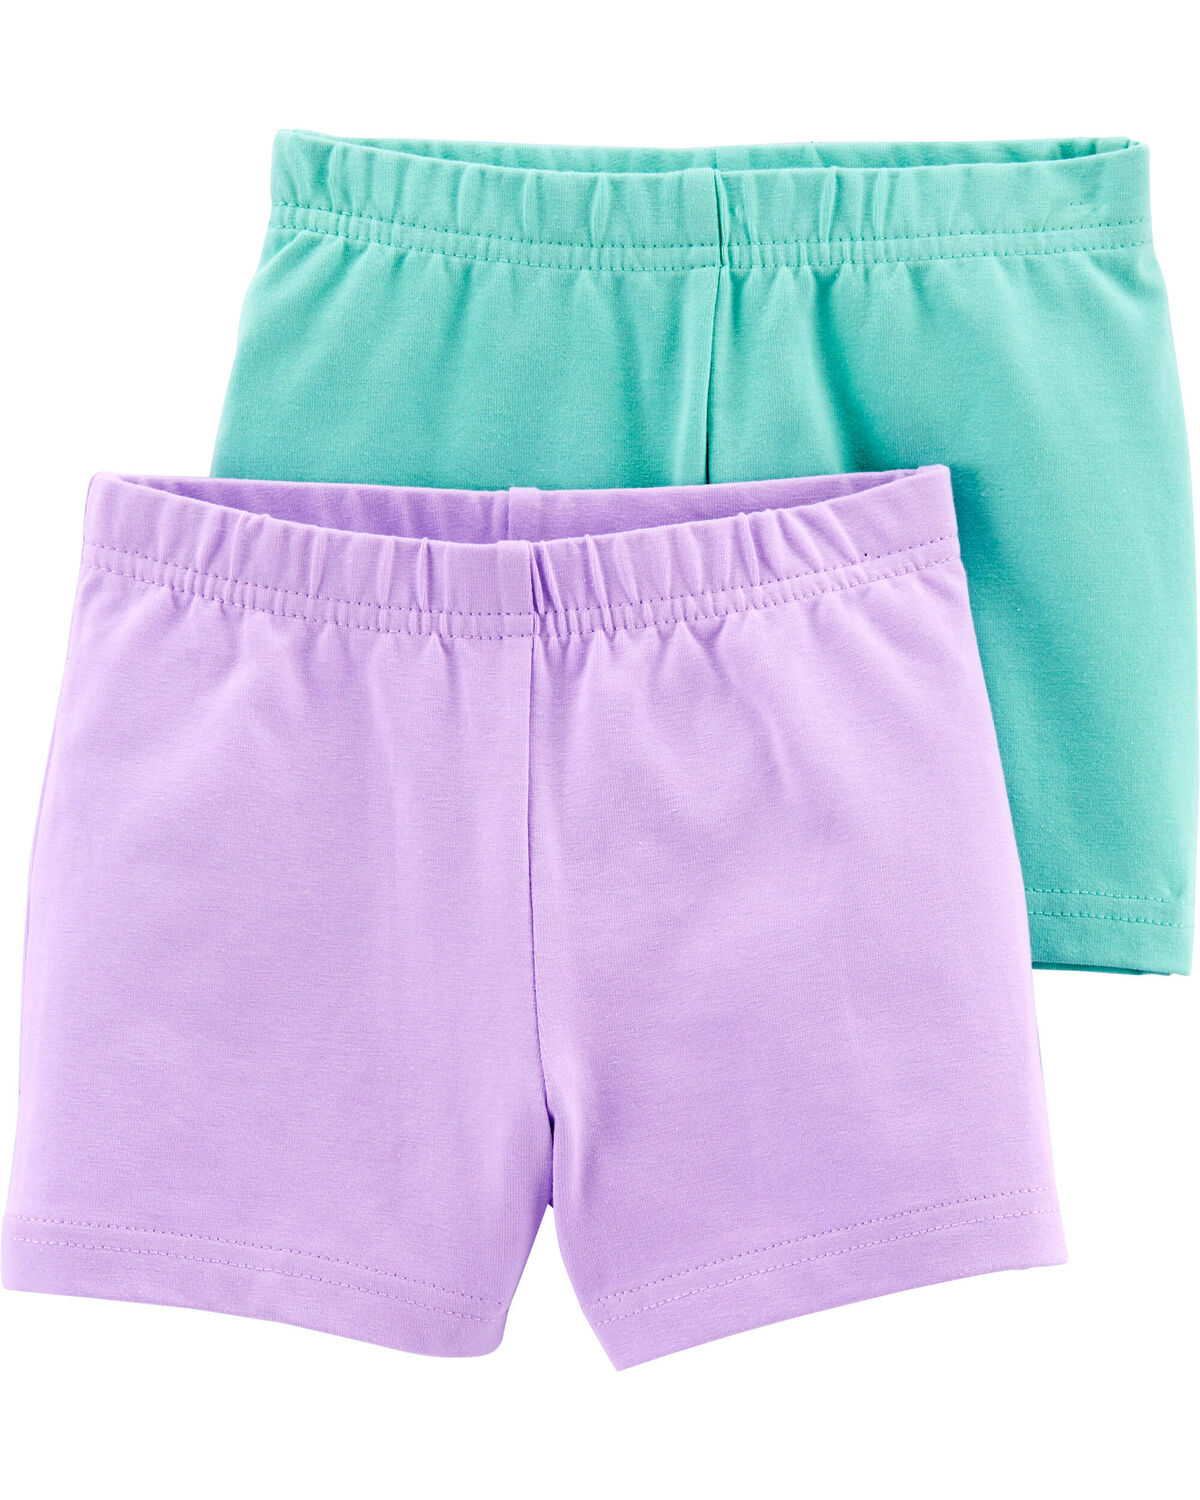 Combo of 2 Cotton Solid Women Regular Shorts Ocean Blue and Purple-40673